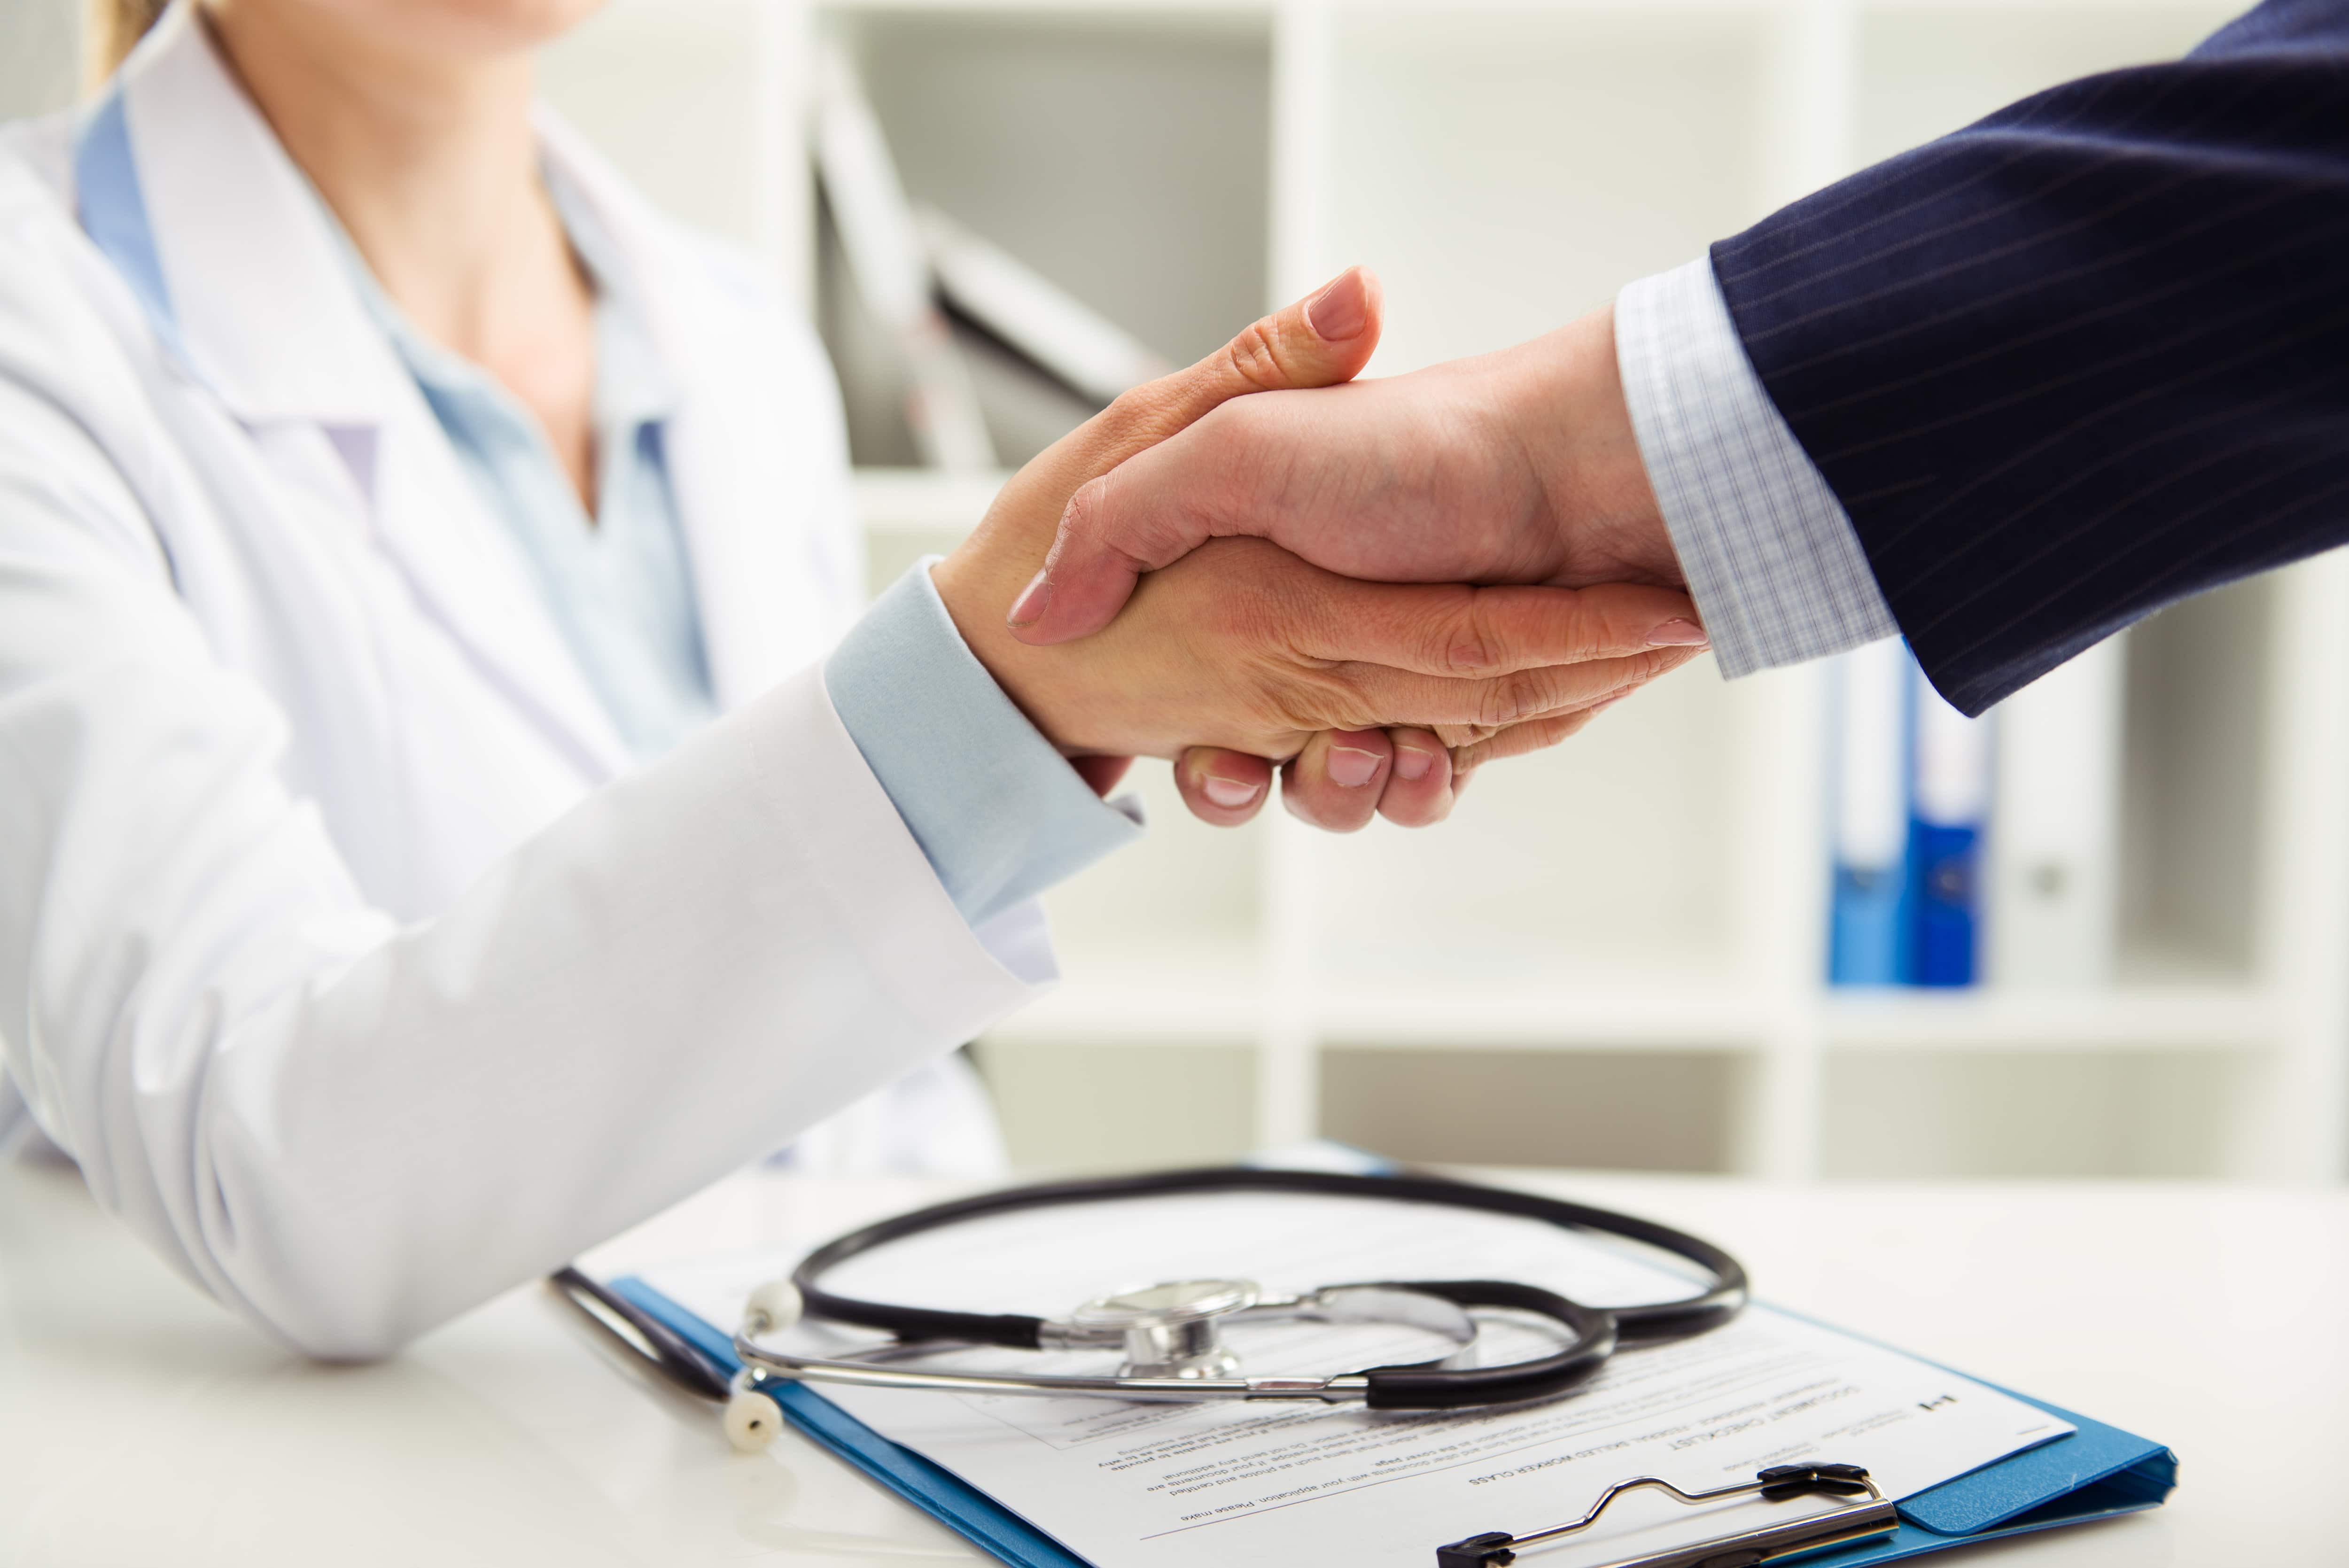 Woman doctor shaking hand with businessman in the office